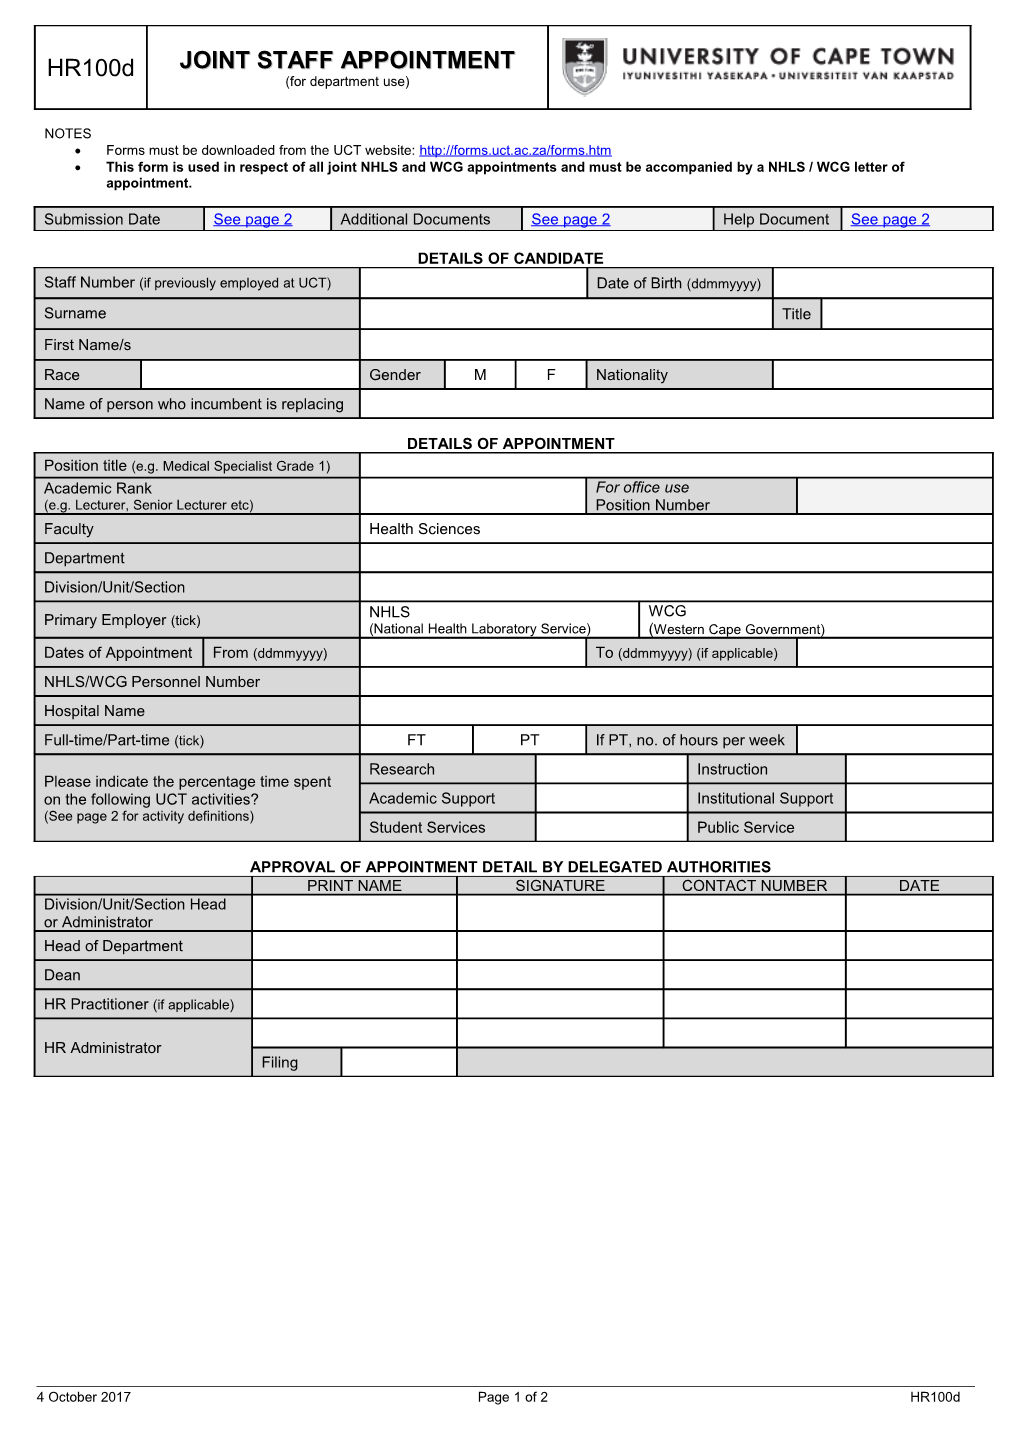 Joint Staff Appointment Form